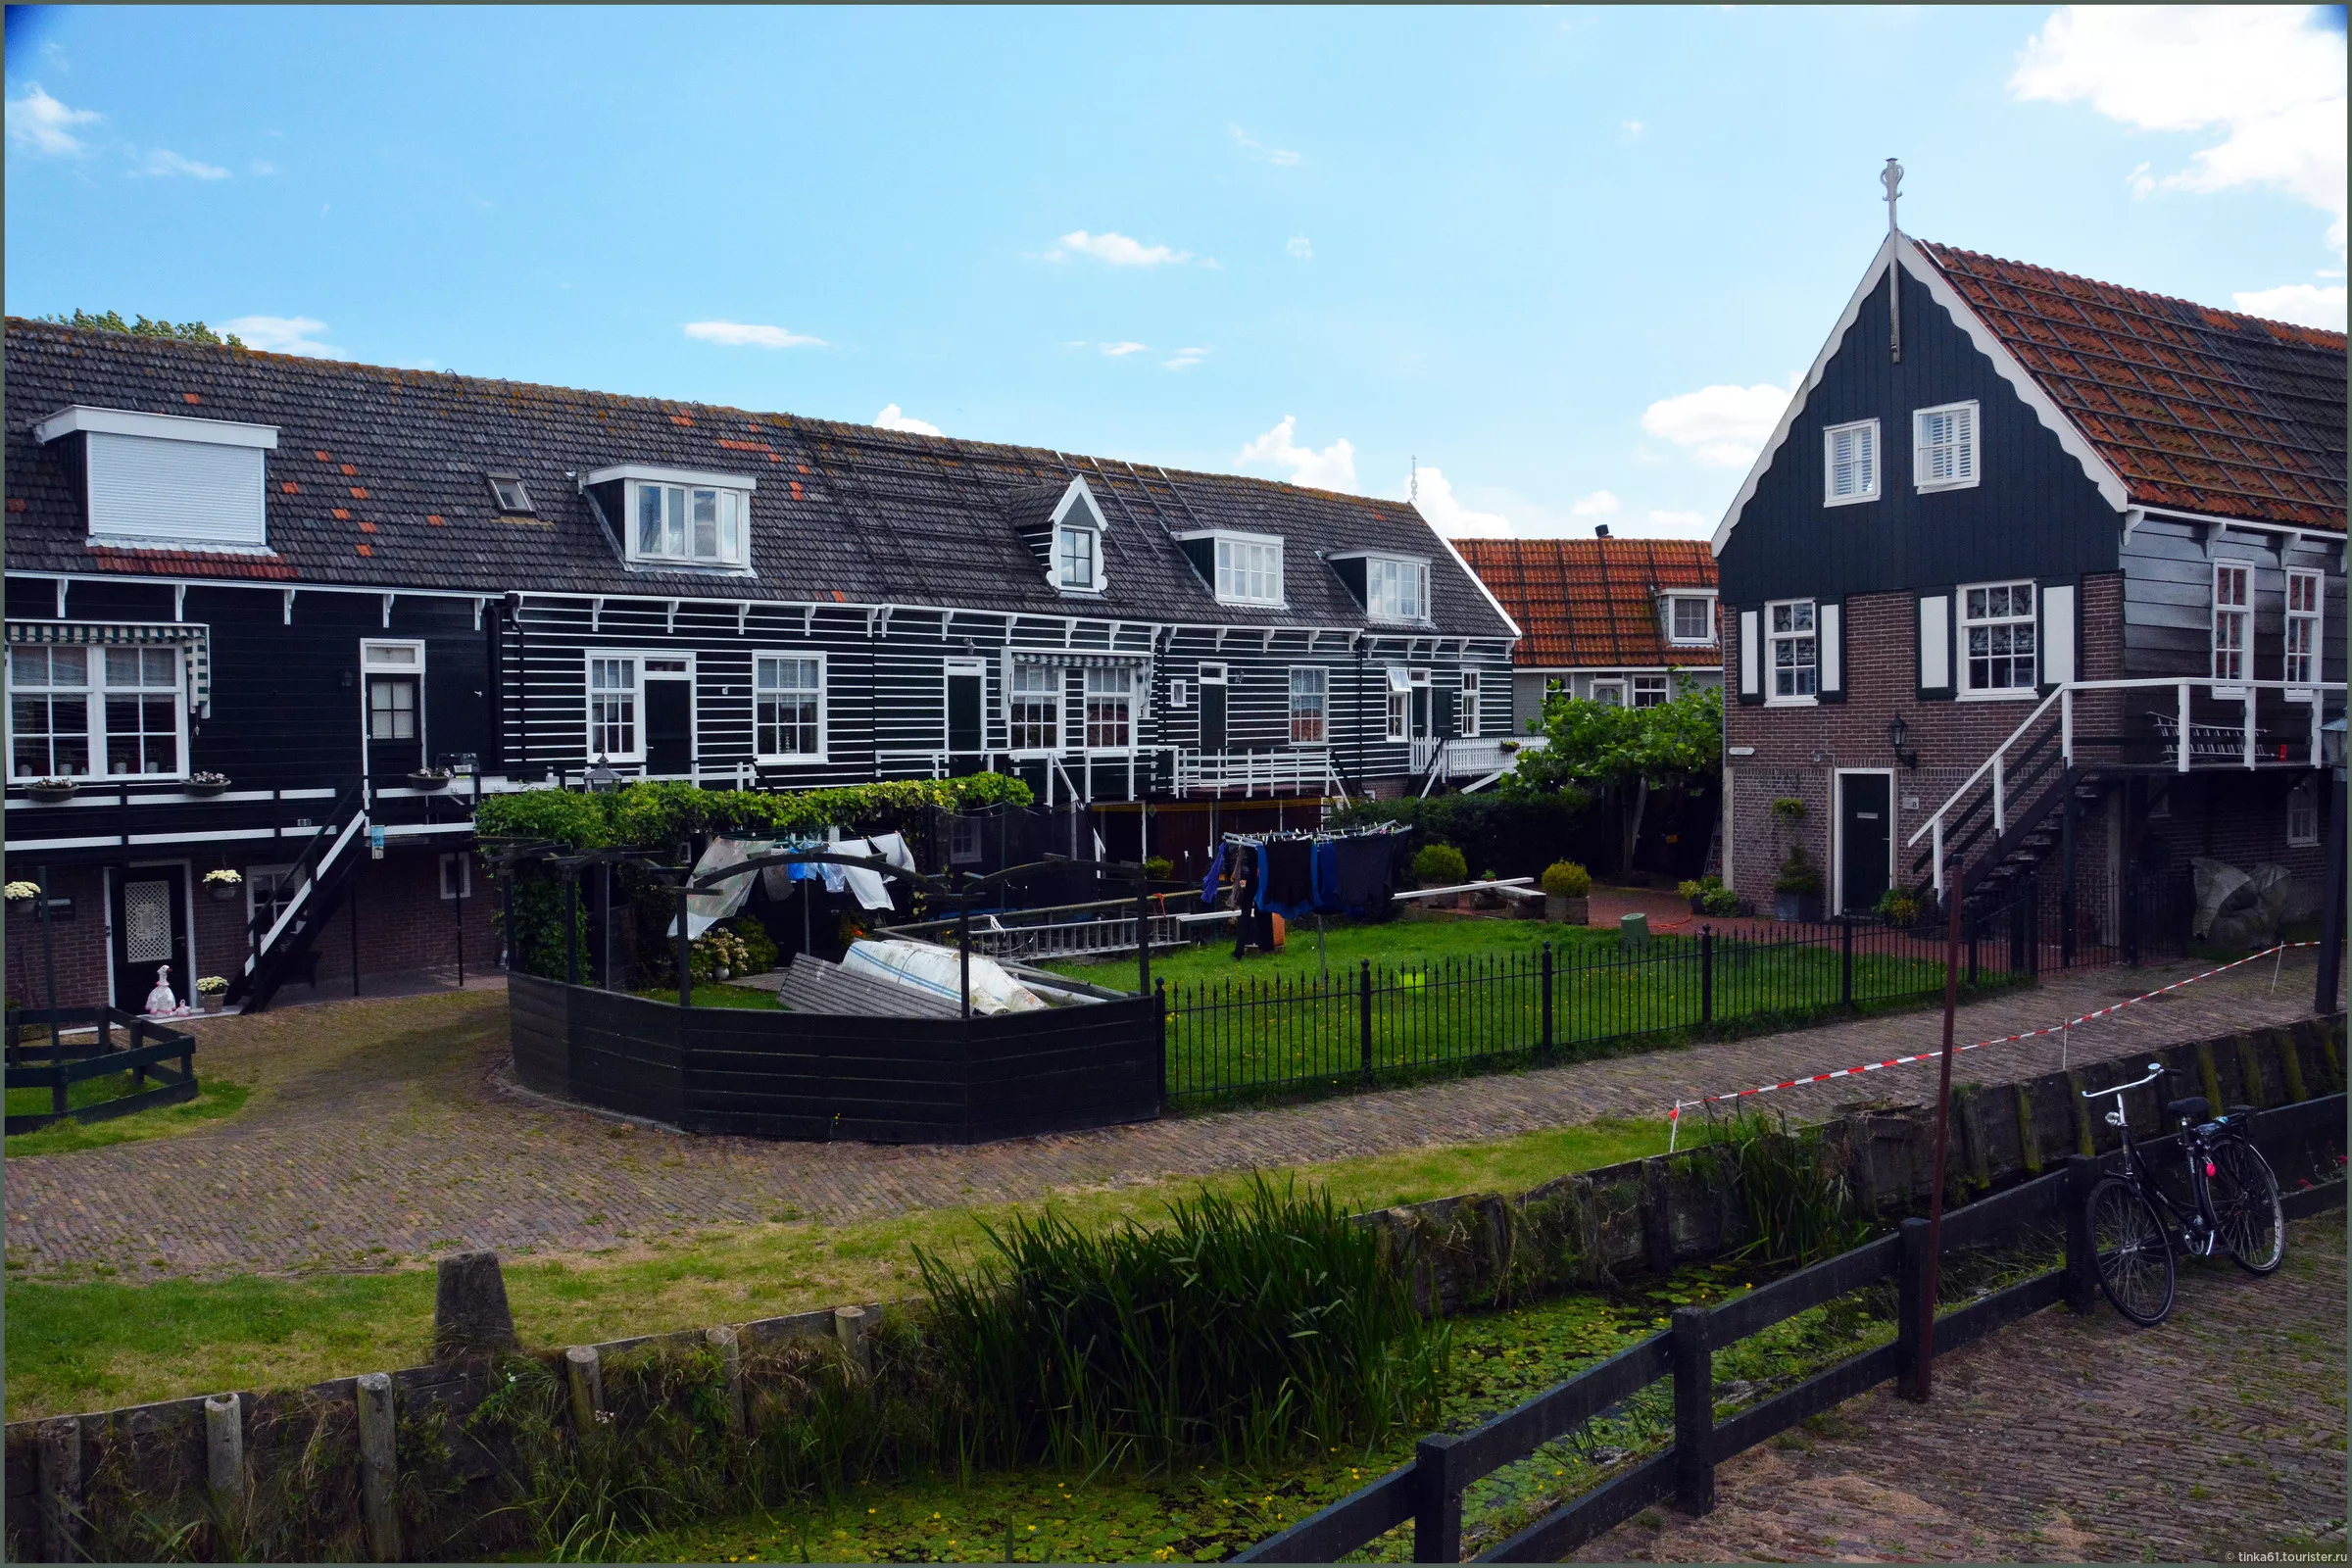 Original House of Marken in Netherlands, Europe | Architecture - Rated 0.8